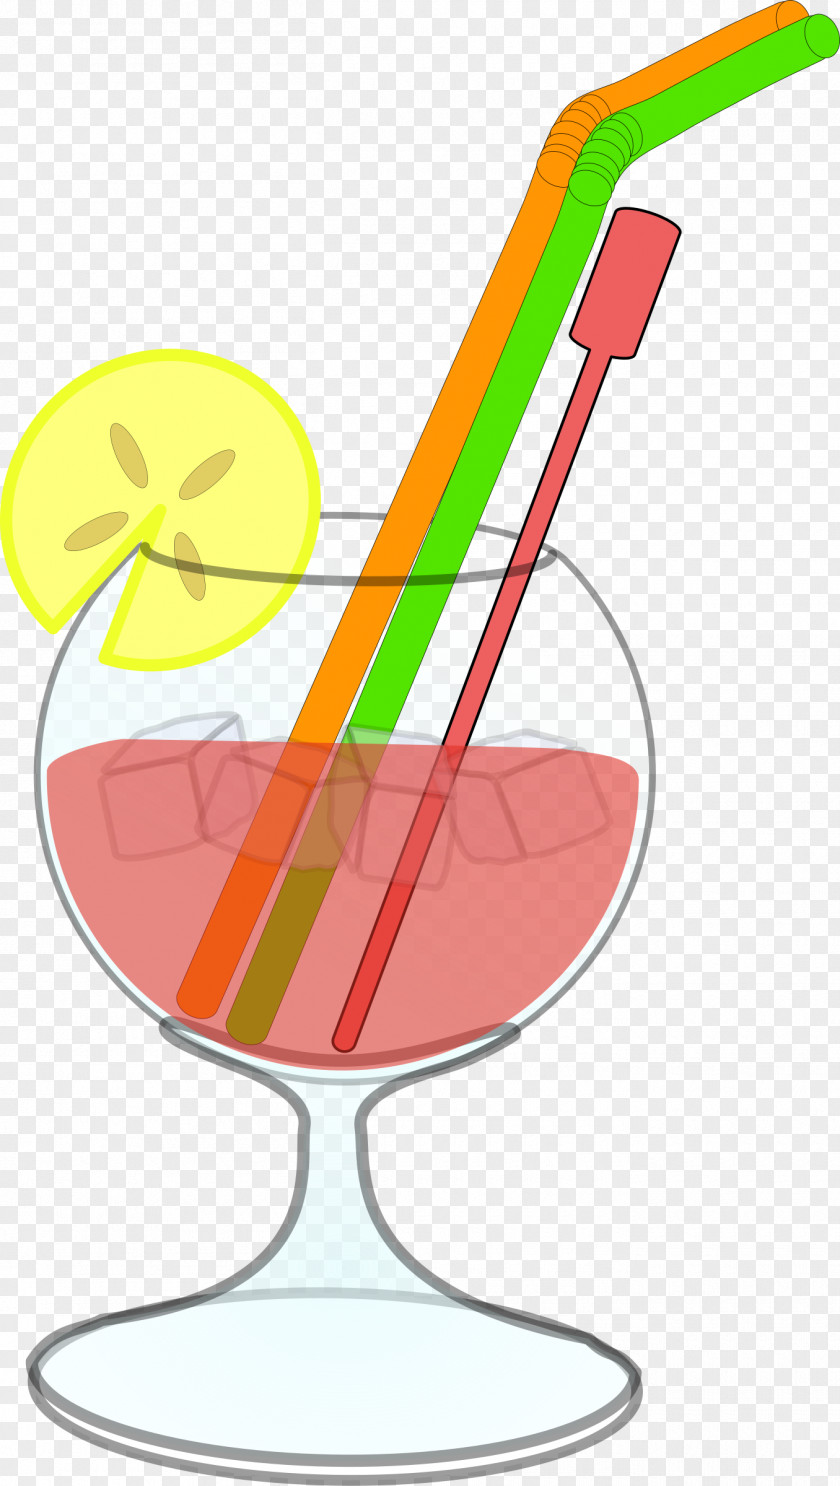 Coctail Cocktail Martini Margarita Drink Clip Art PNG